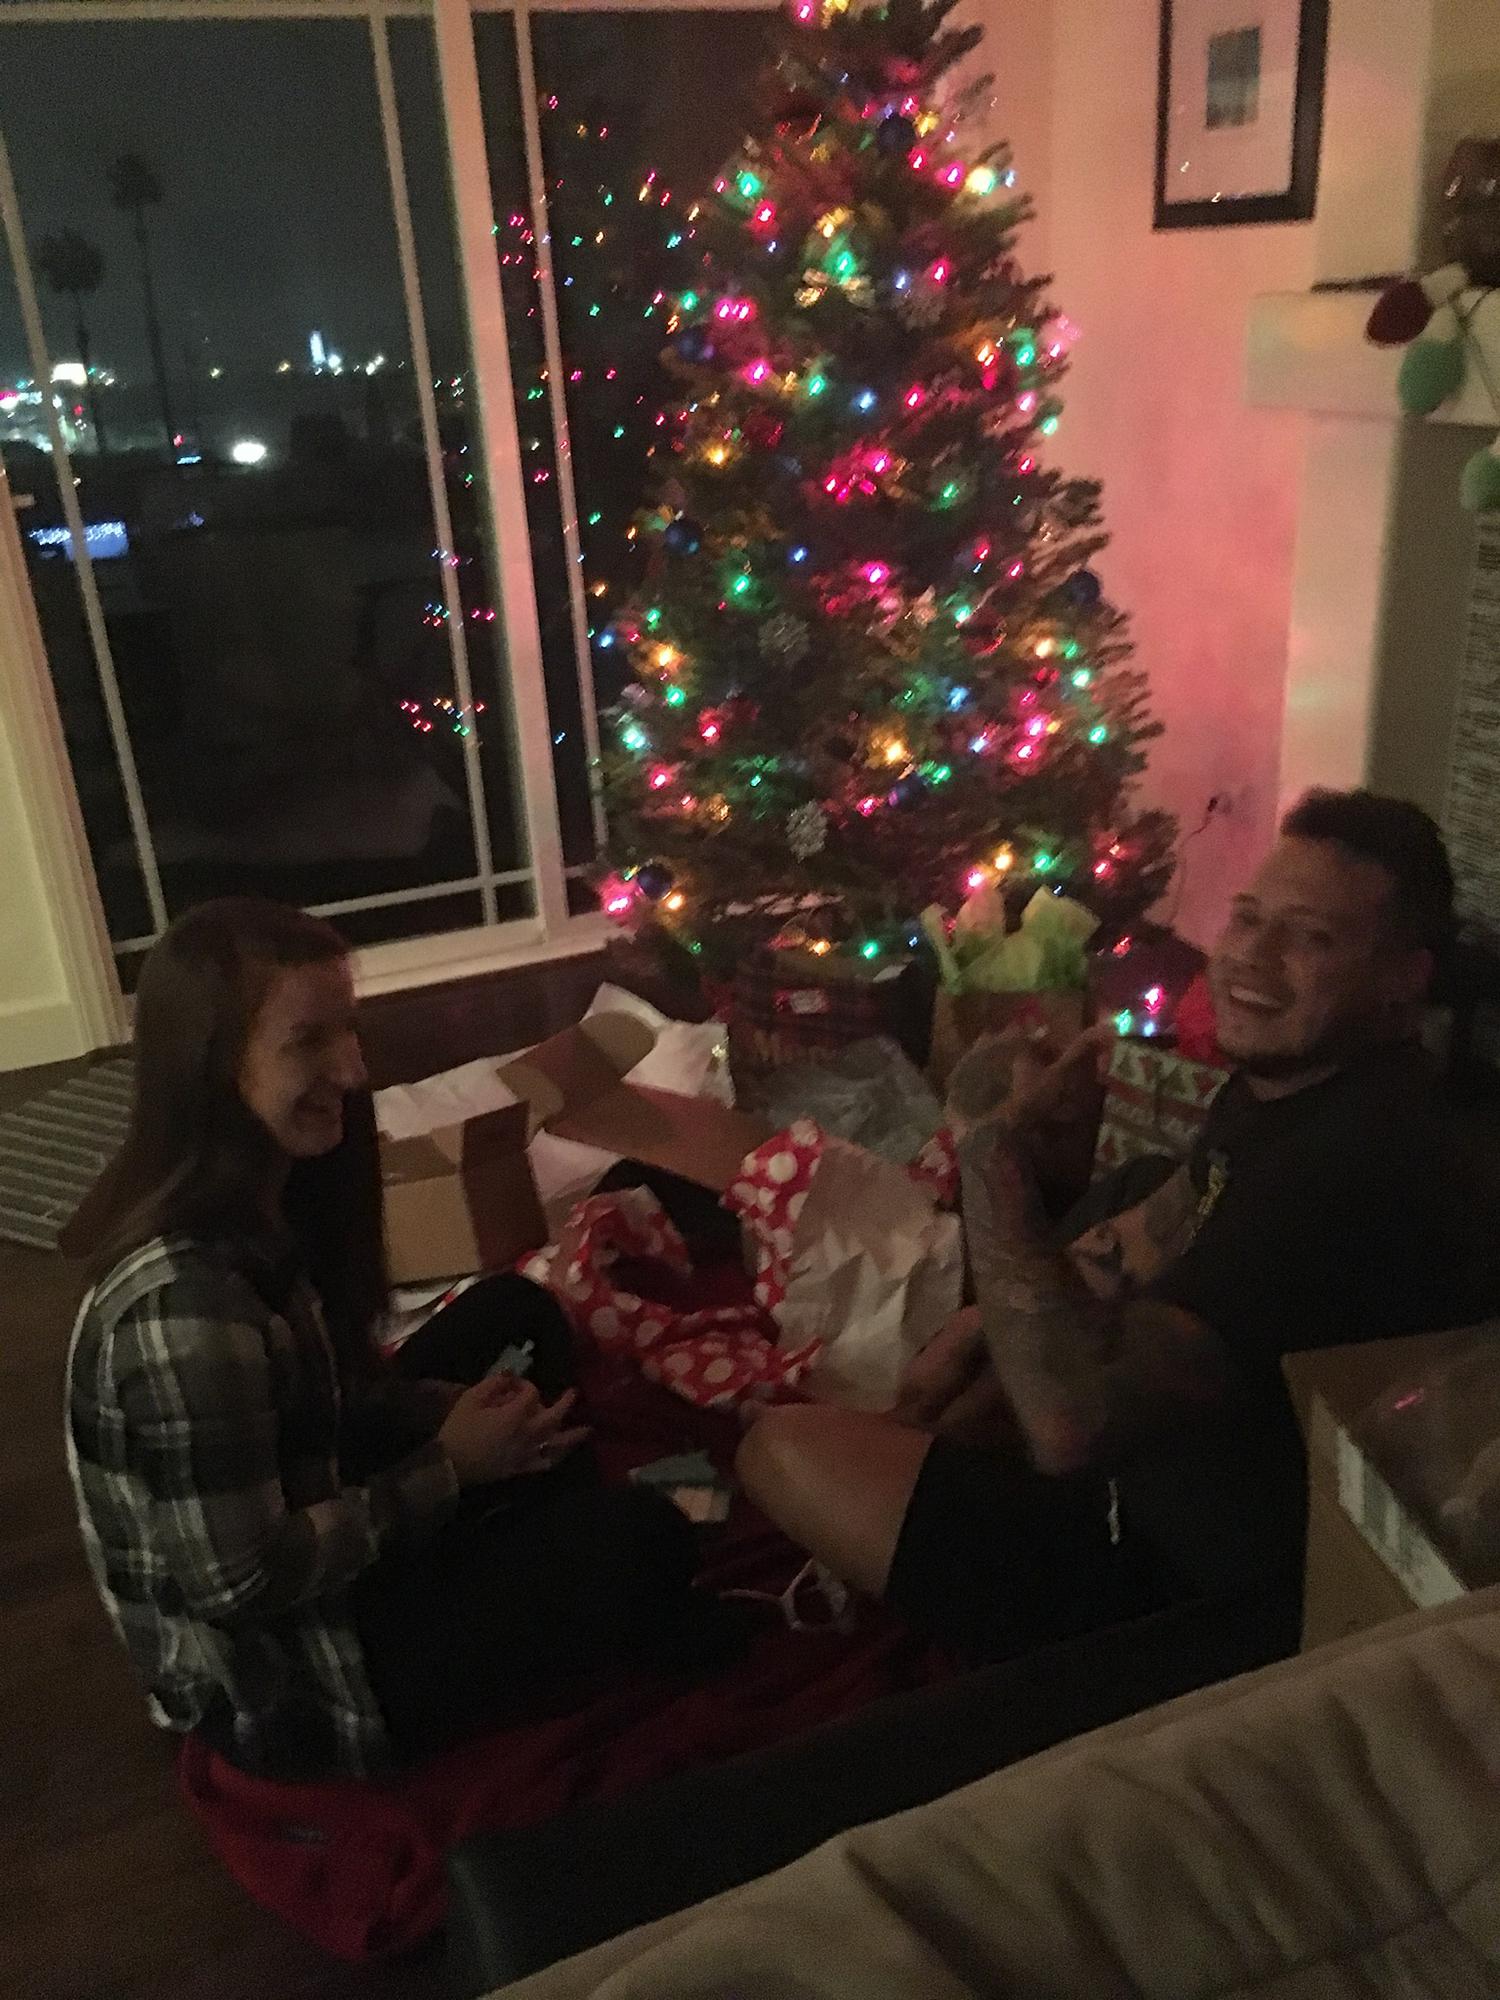 Our first Christmas!  Alex planned to give me my gift that said "I Love You" for the first time but Breanne was there taking pictures so he told me to wait hahaha